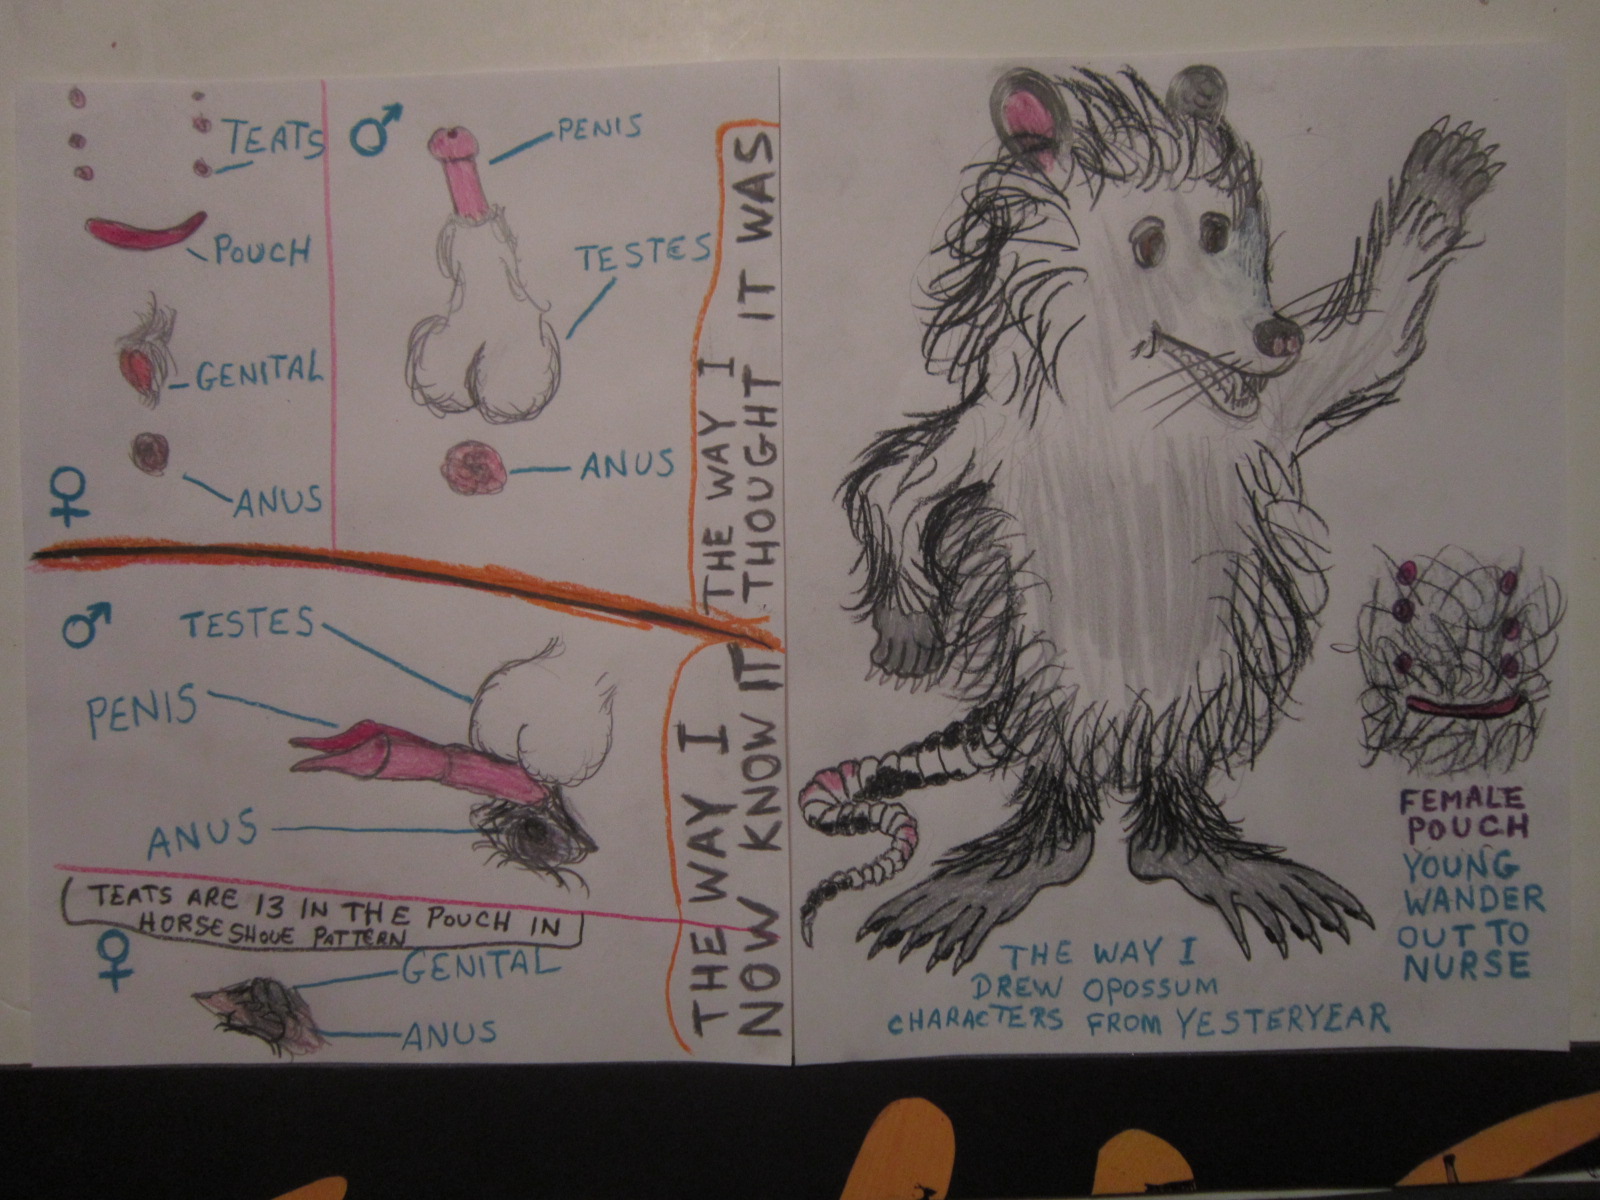 The way I Use to Draw Opossum Characters 30 Years Ago